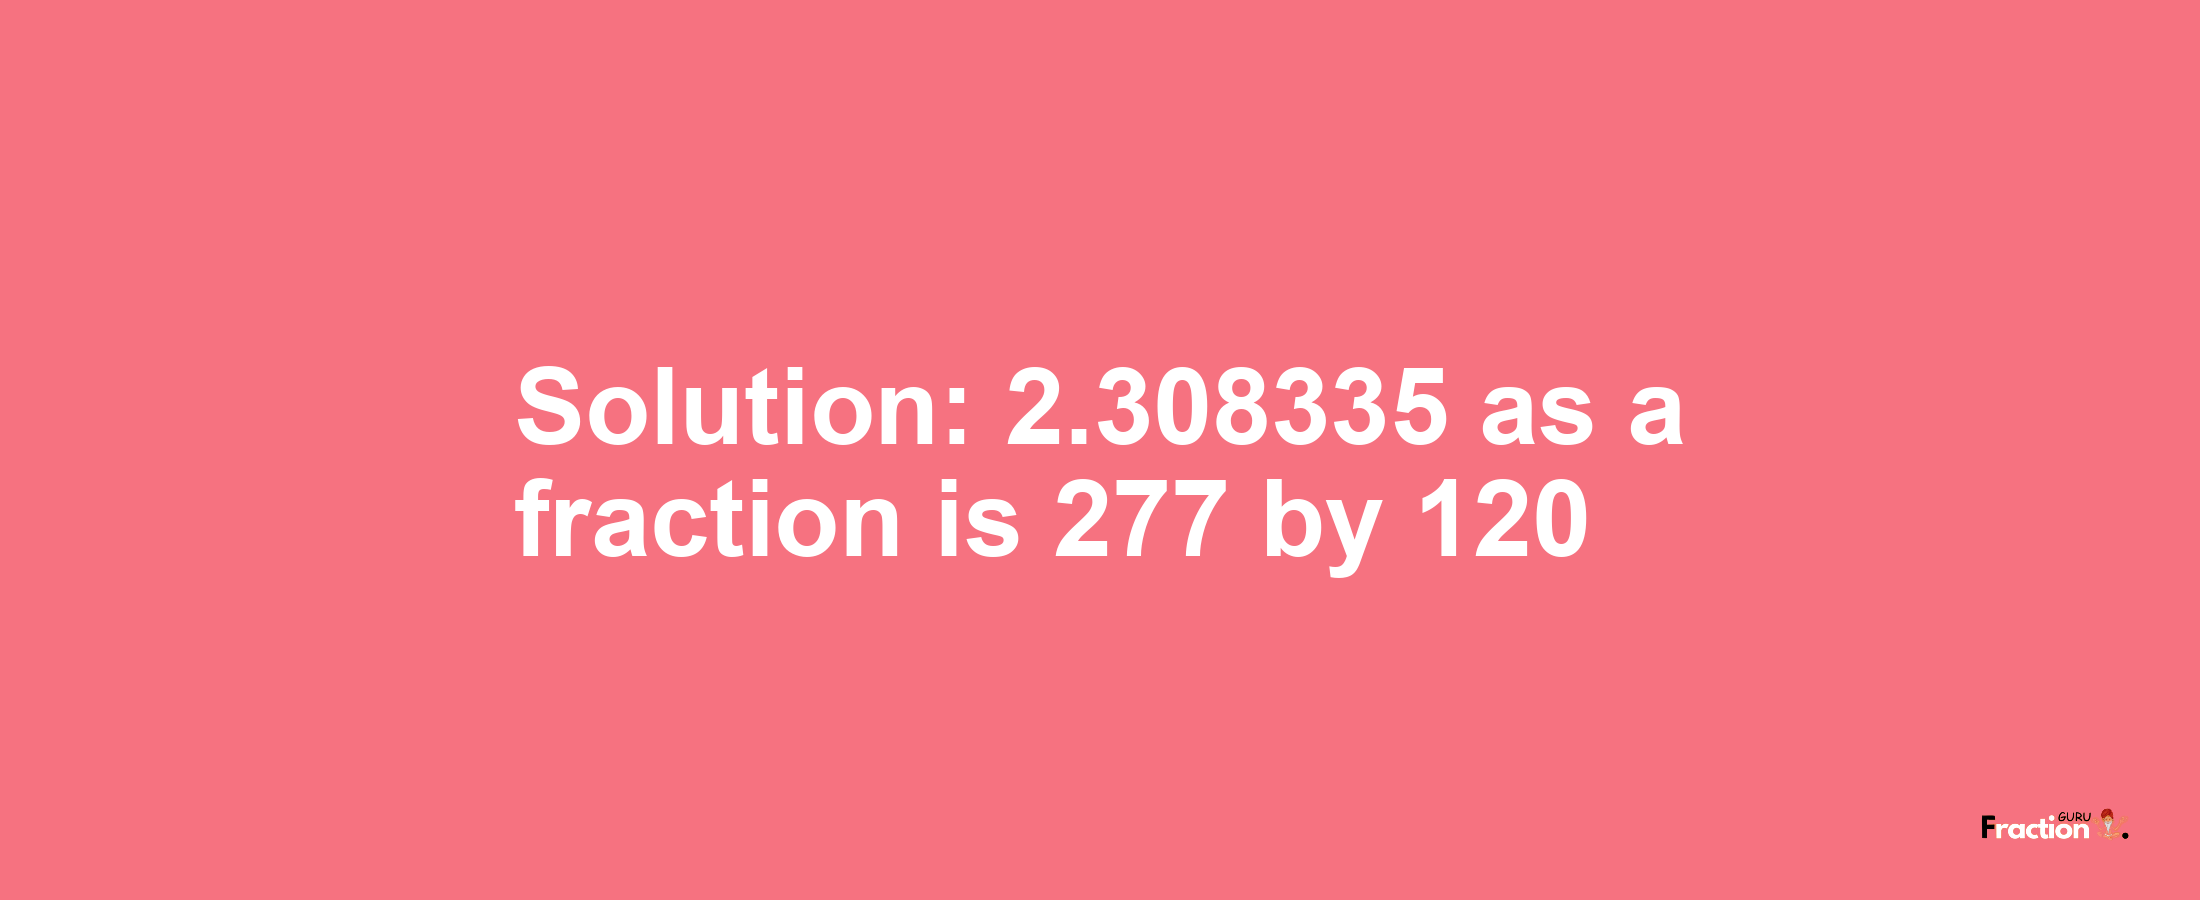 Solution:2.308335 as a fraction is 277/120